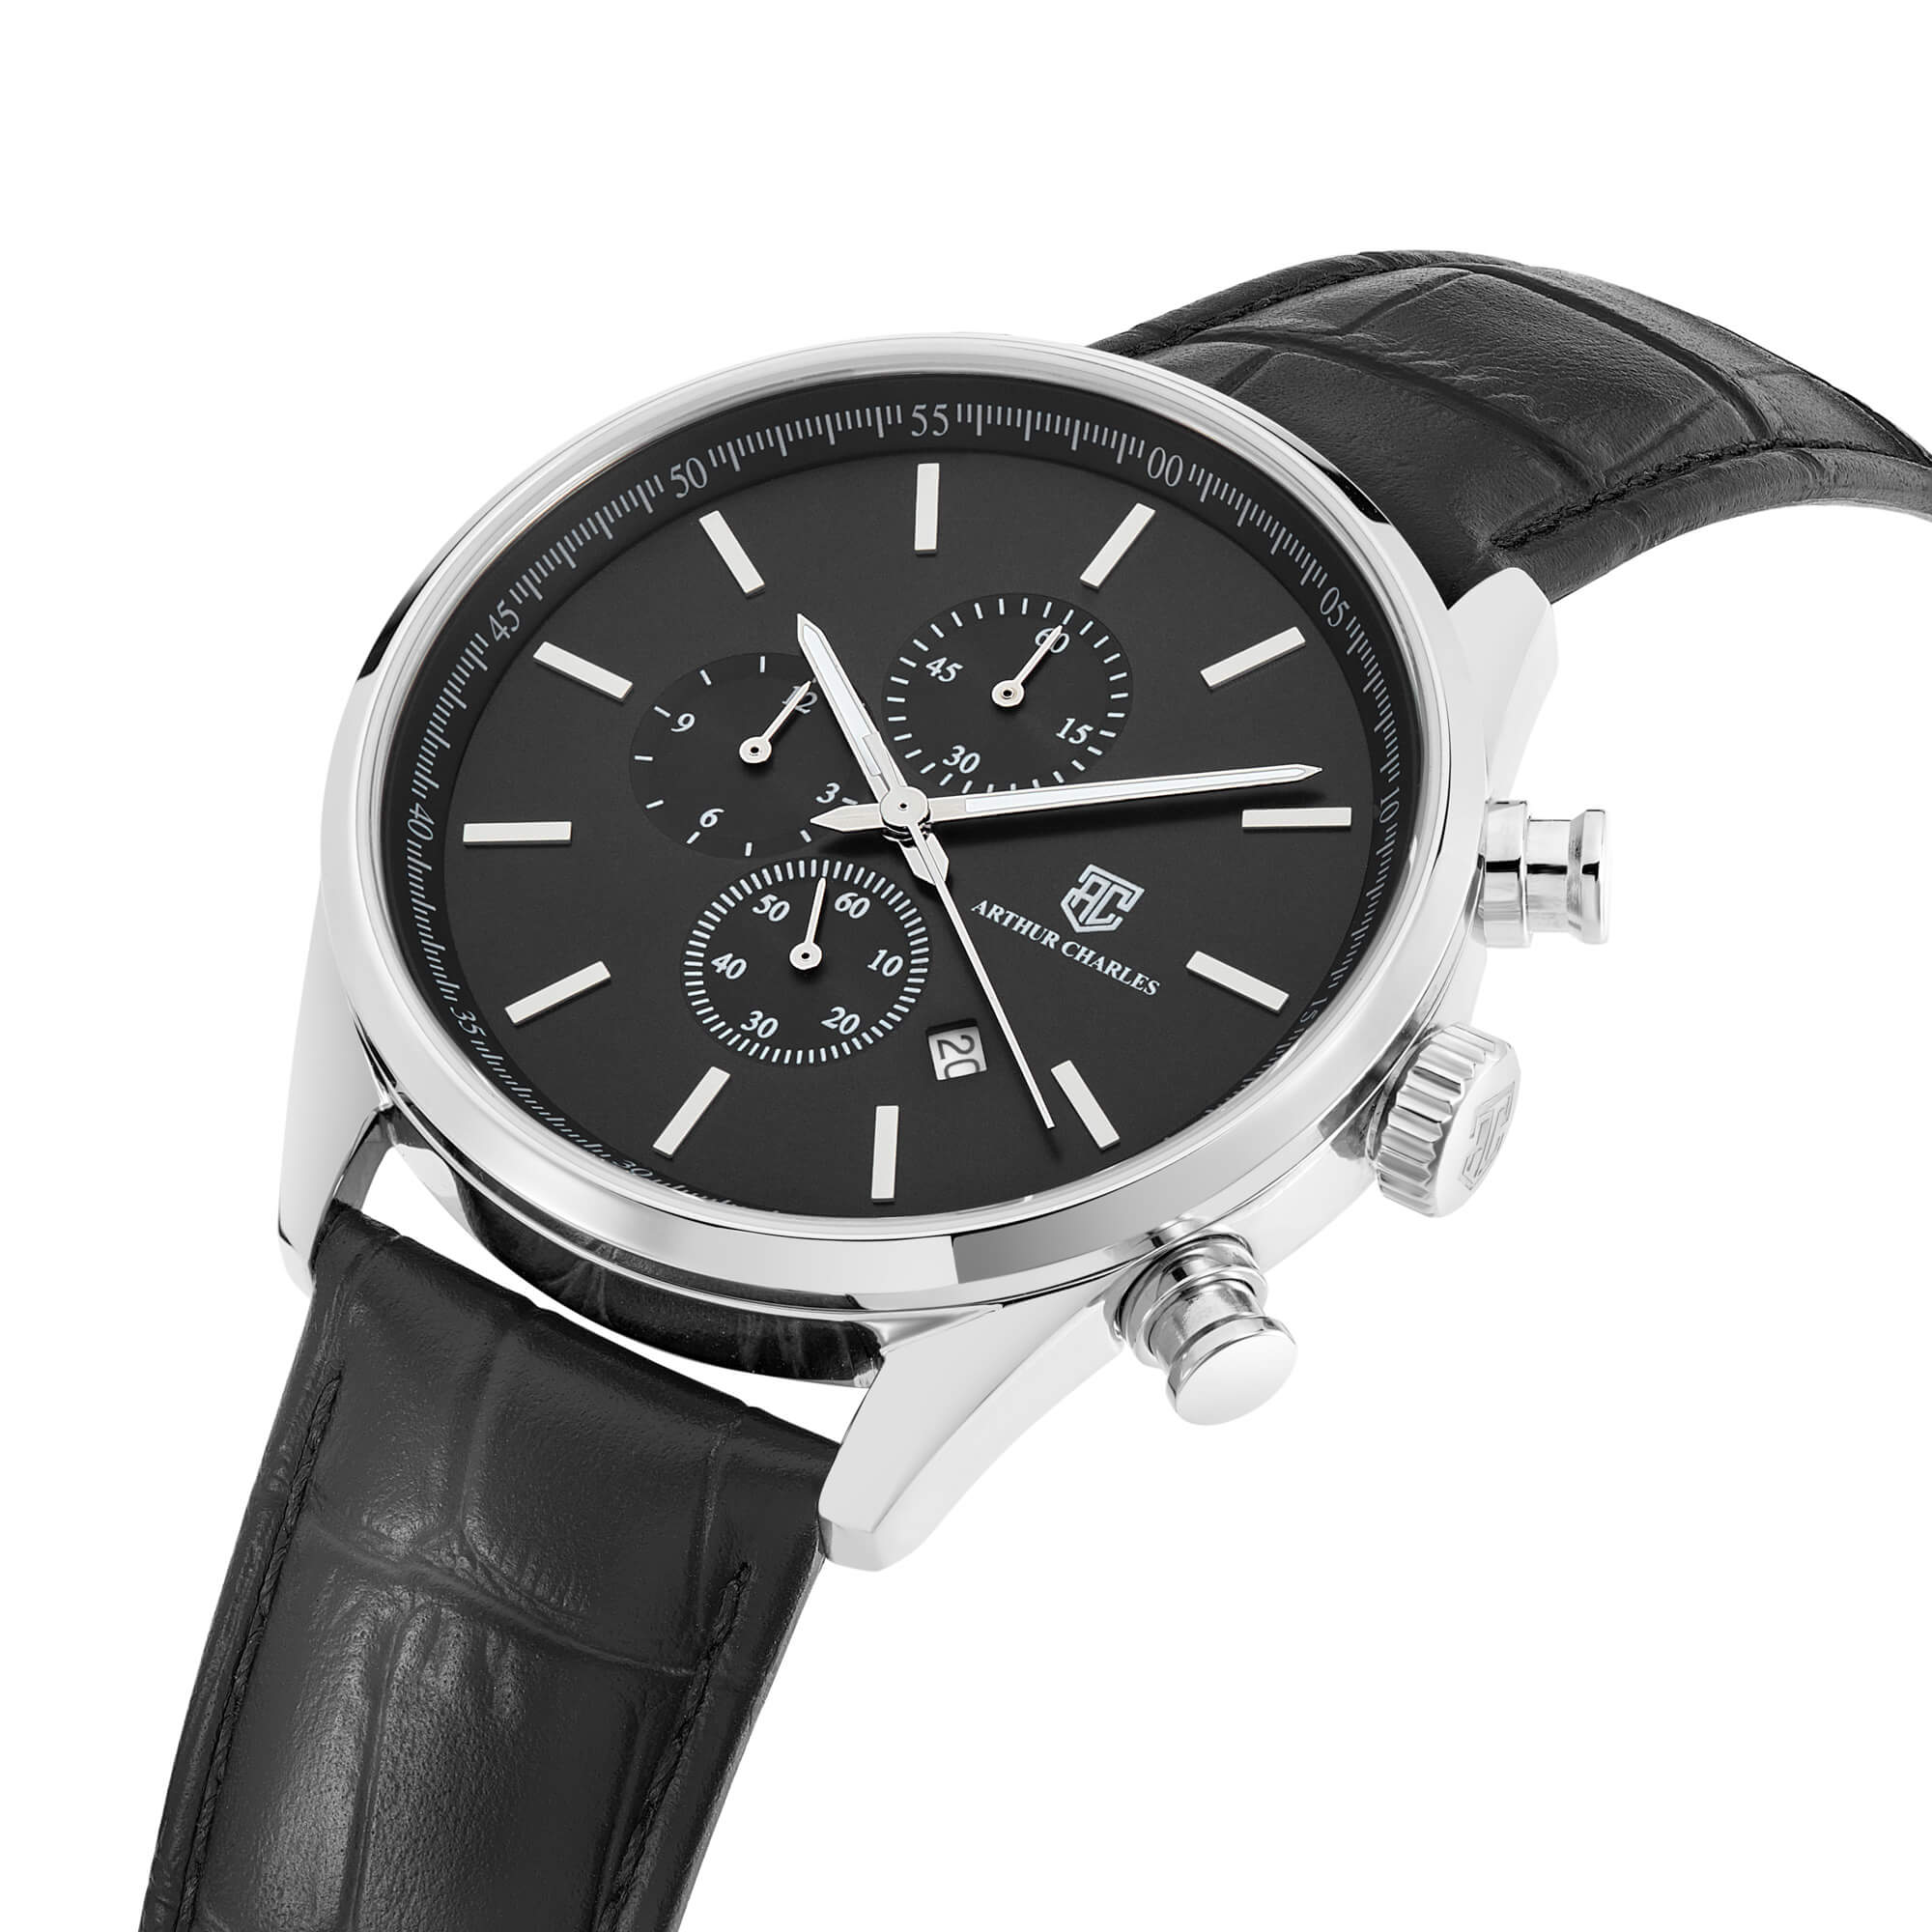 A side view of the Silver Chrono Prestige Watch by Arthur Charles. The Arthur Charles logo is displayed on the front of the watch and the crown. This timepiece features silver chronograph movement and uses a high end genuine leather black strap.